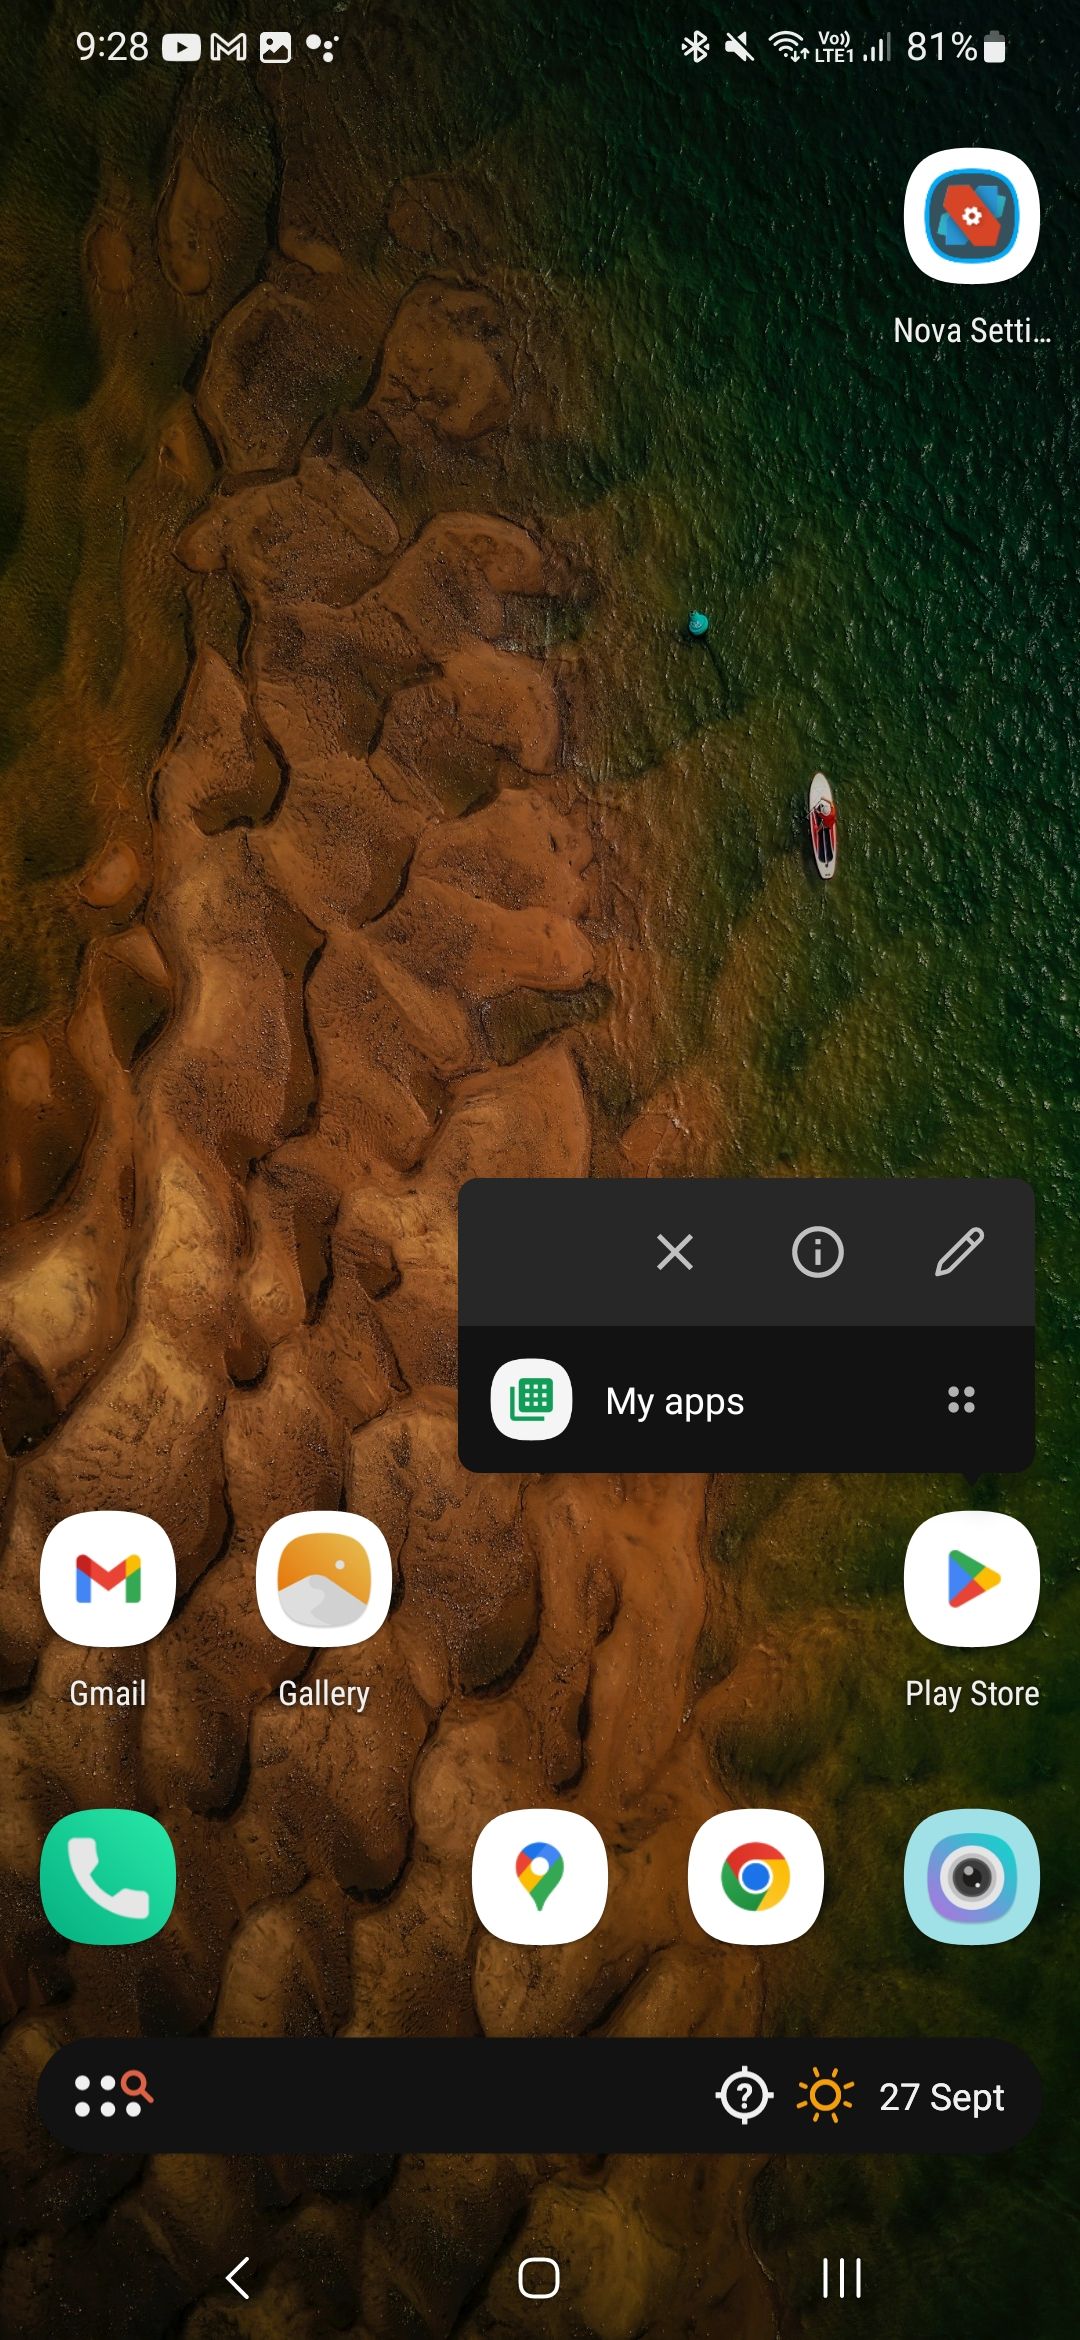 Changing app icon in Nova launcher